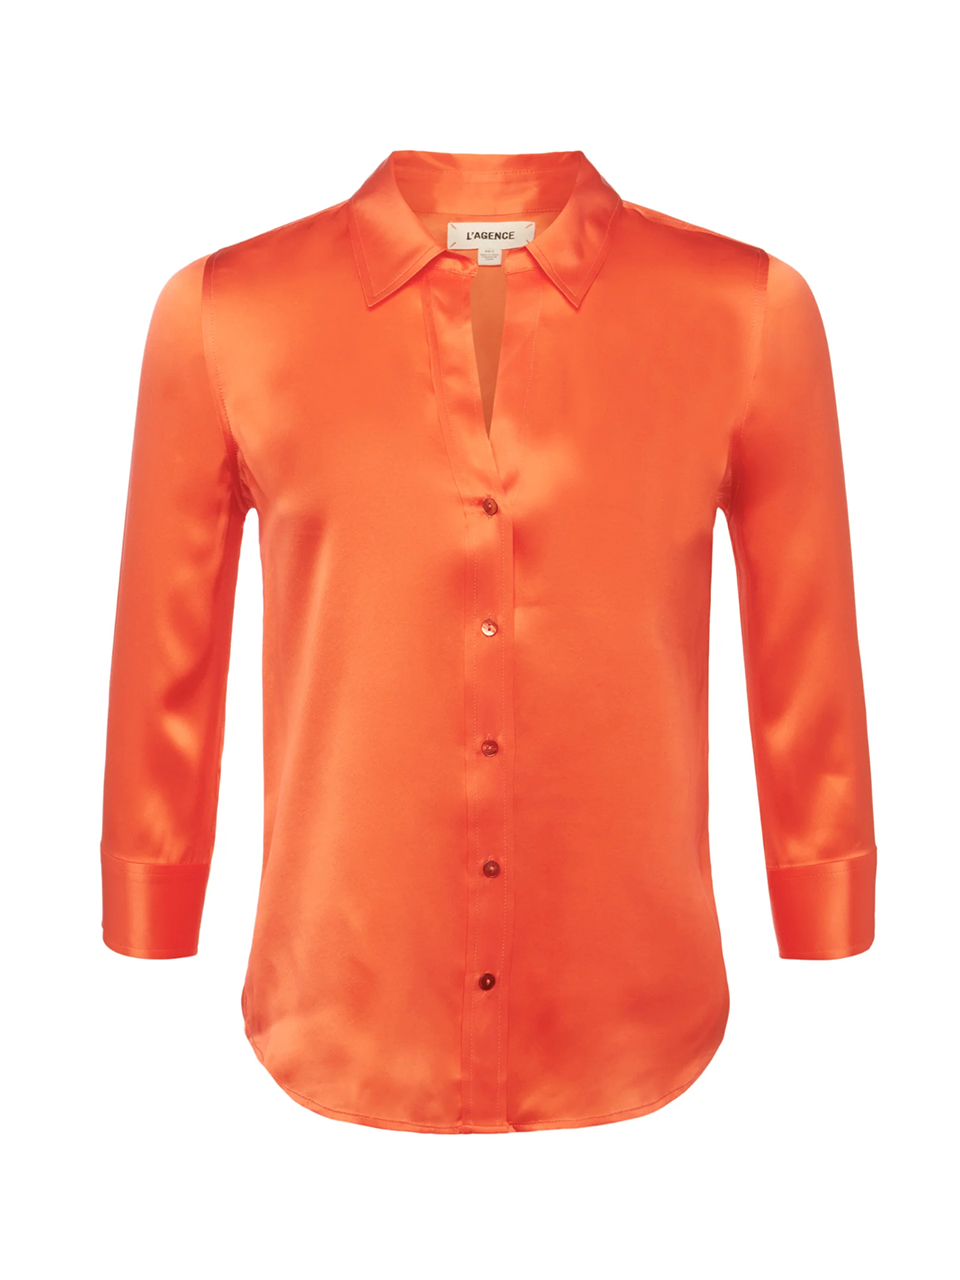 L'AGENCE Dani Button Front Blouse in Bright Orange Product Shot 